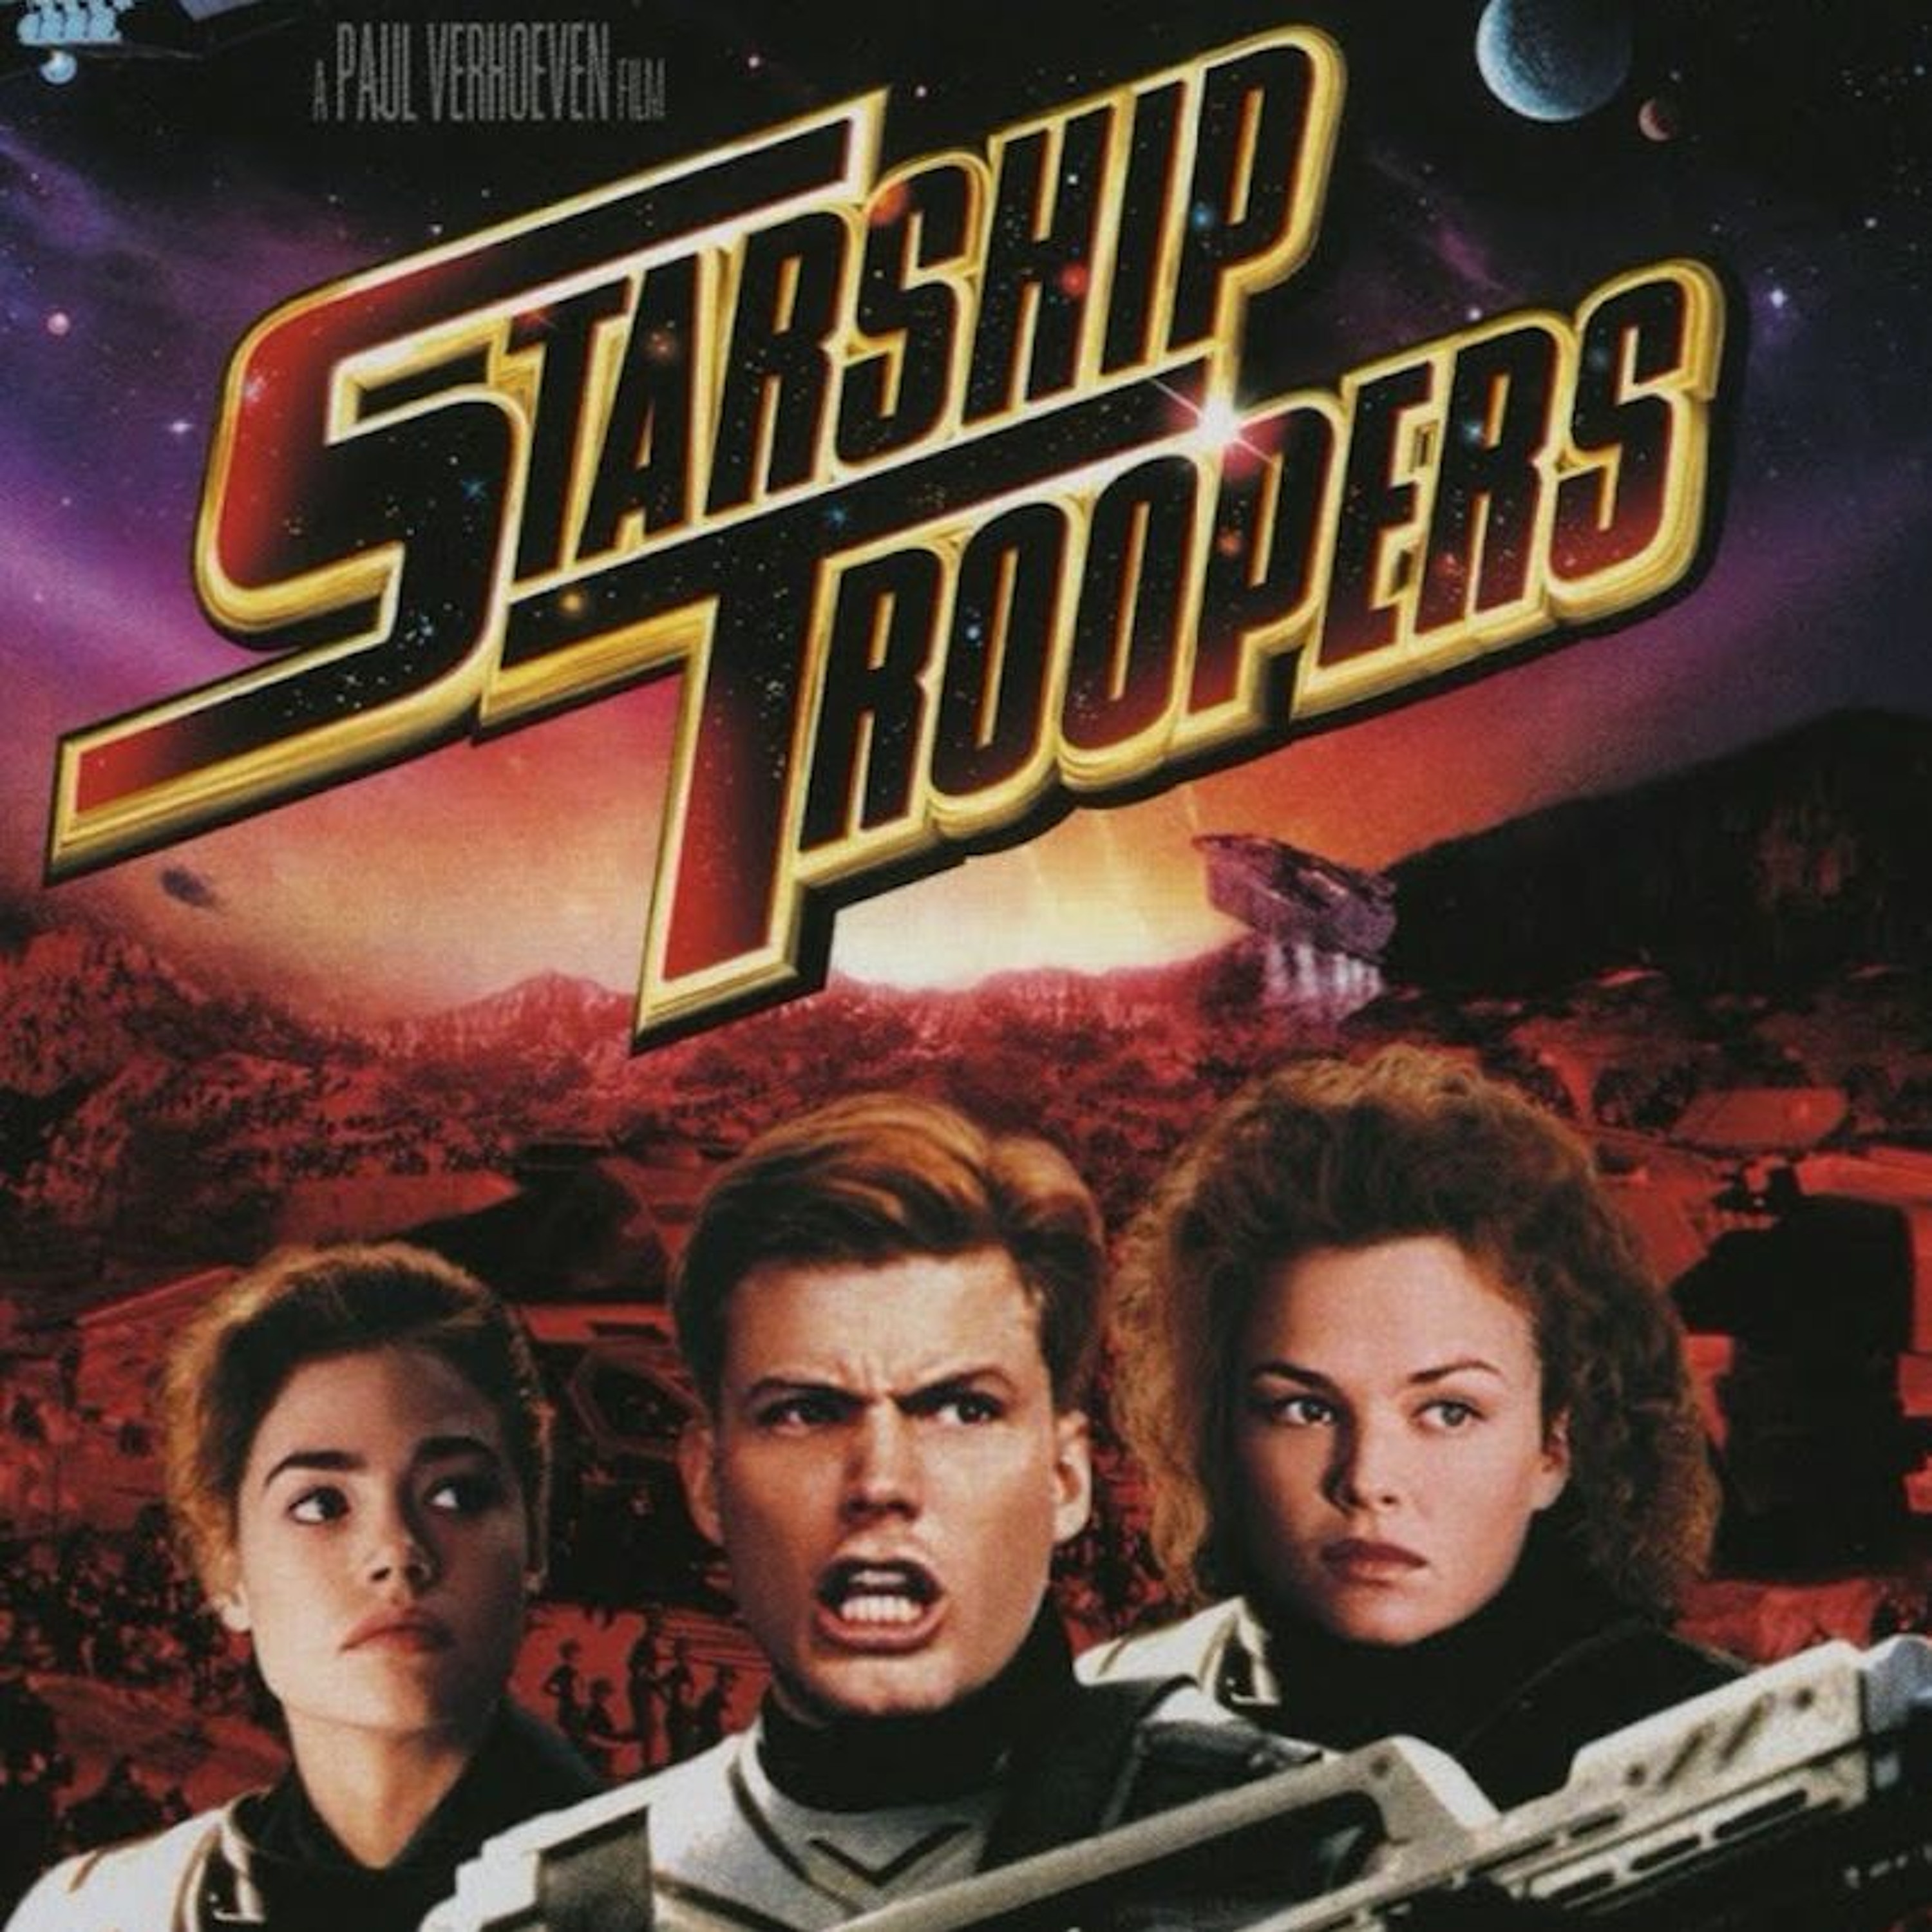 Episode 12 - Starship Troopers Or Making a Space Podcast Radio Play